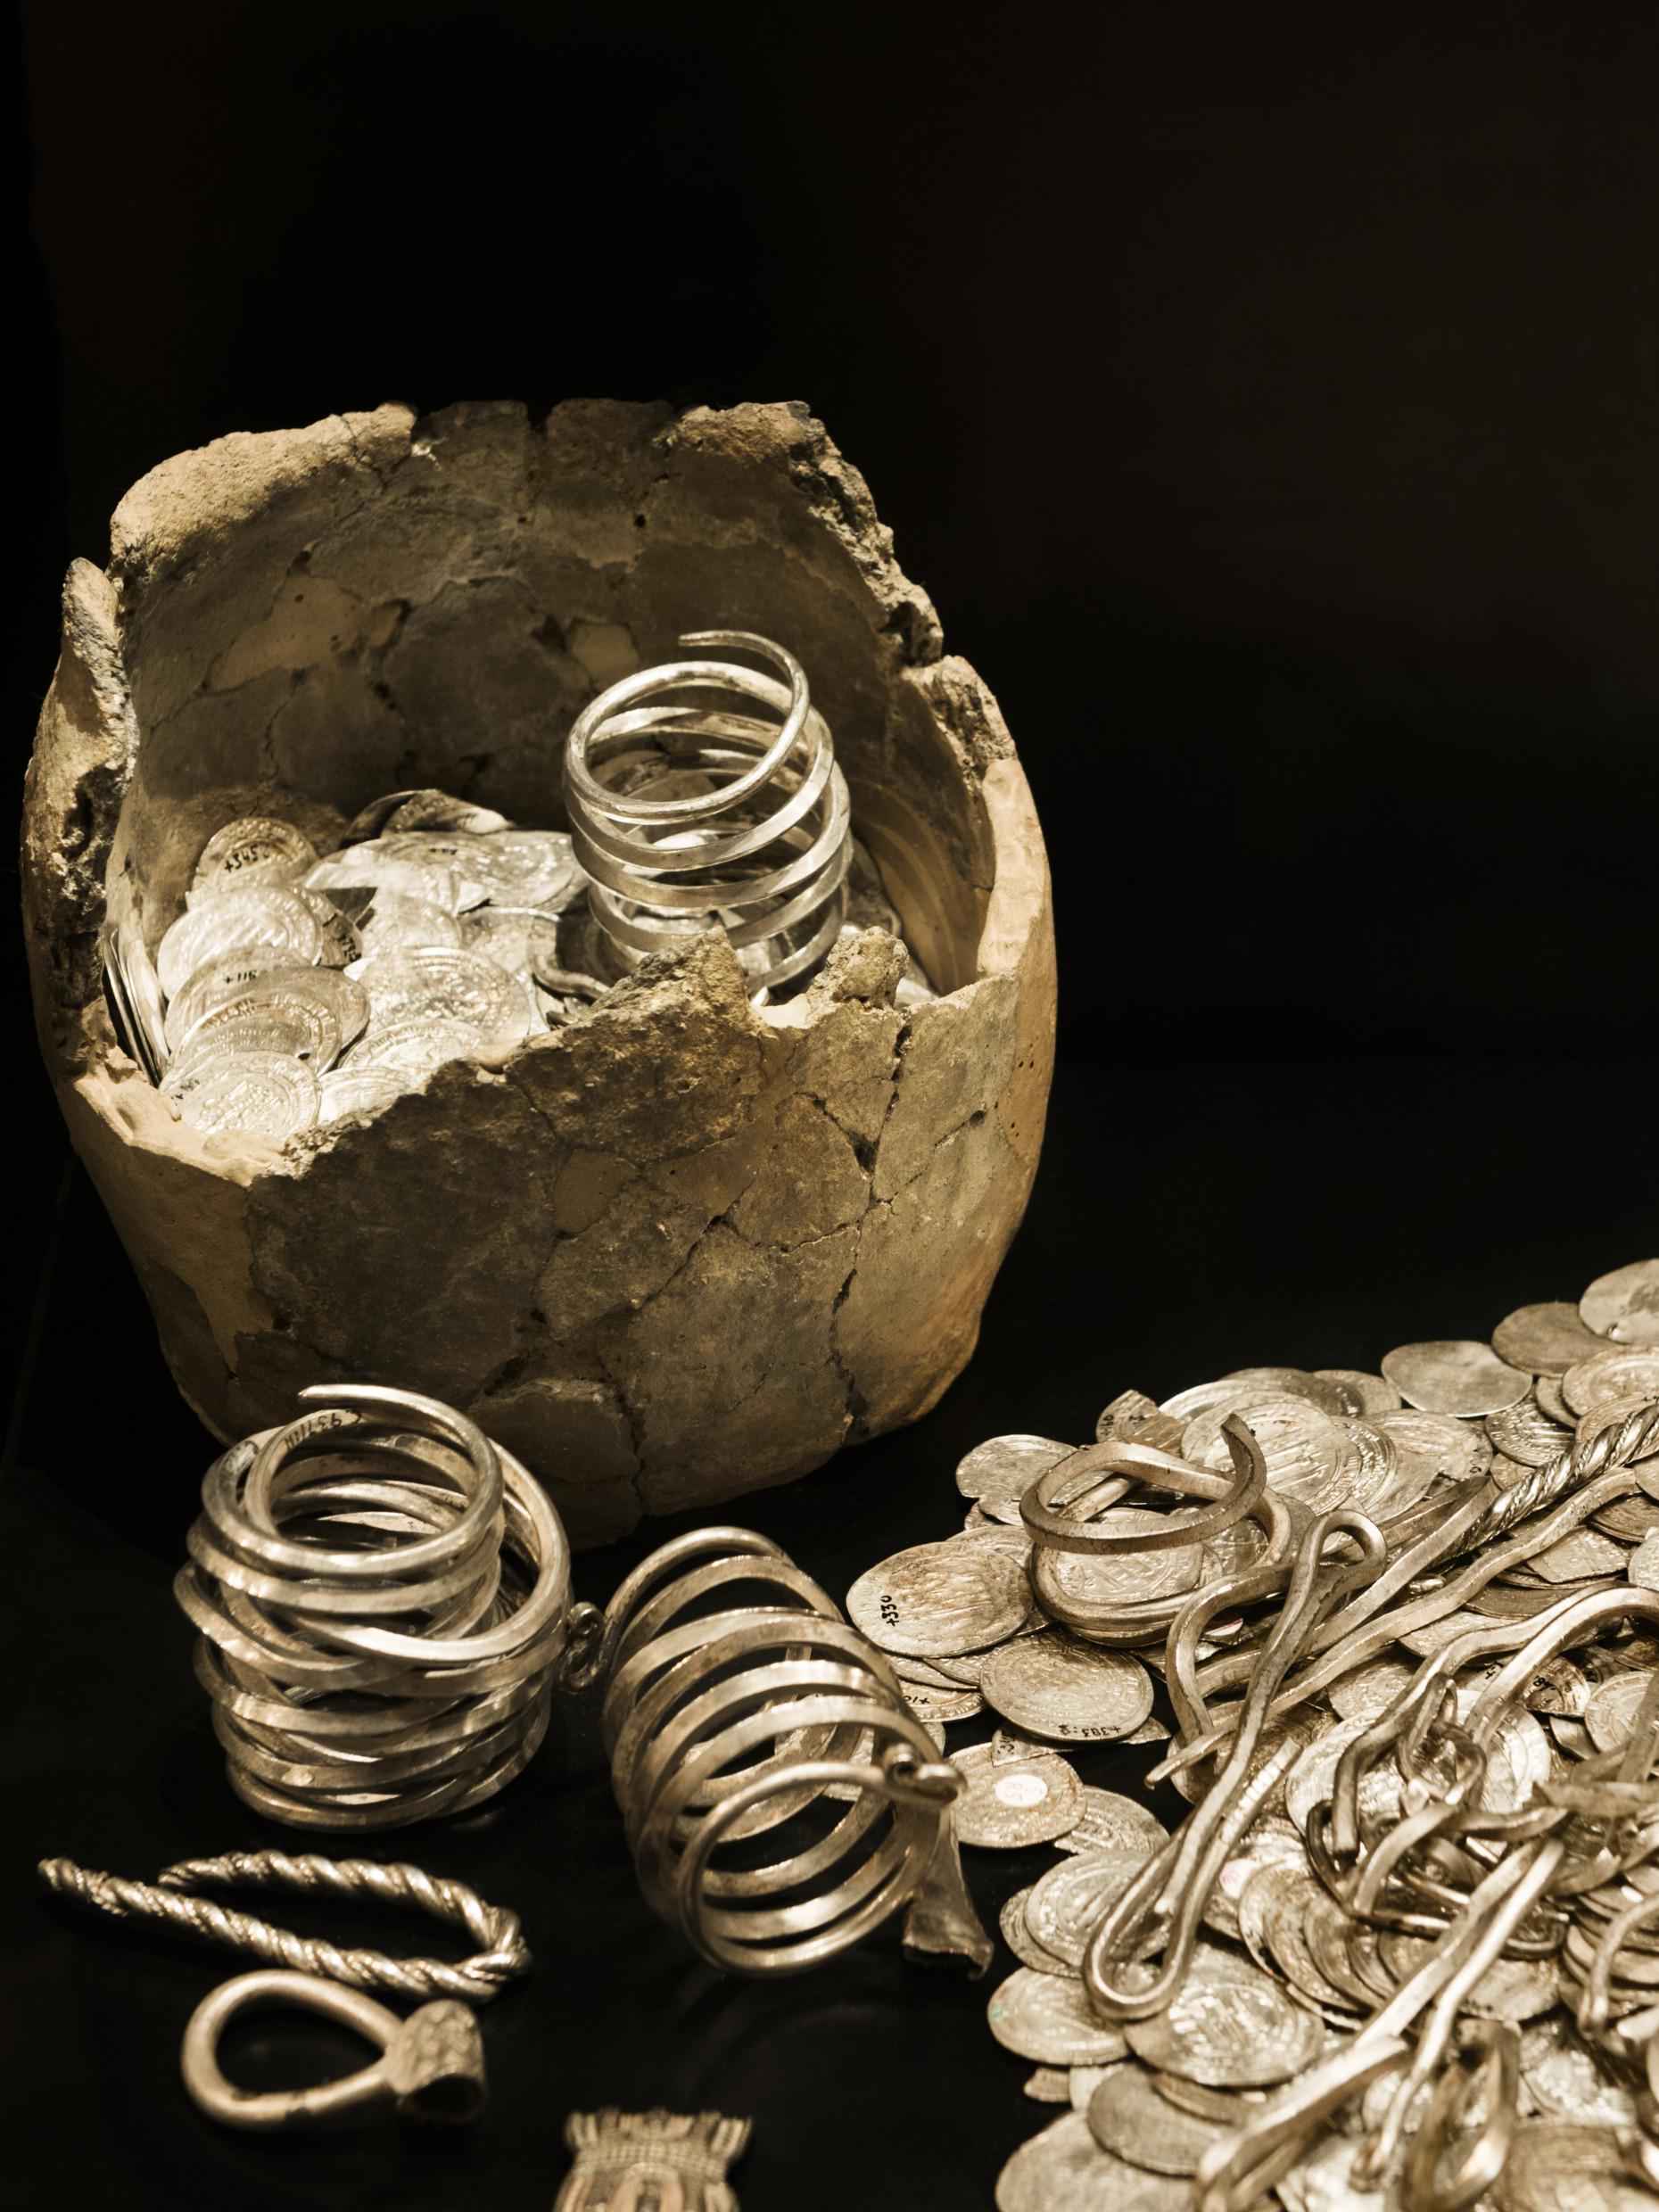 Old silver and gold coins and jewelry on a black surface.